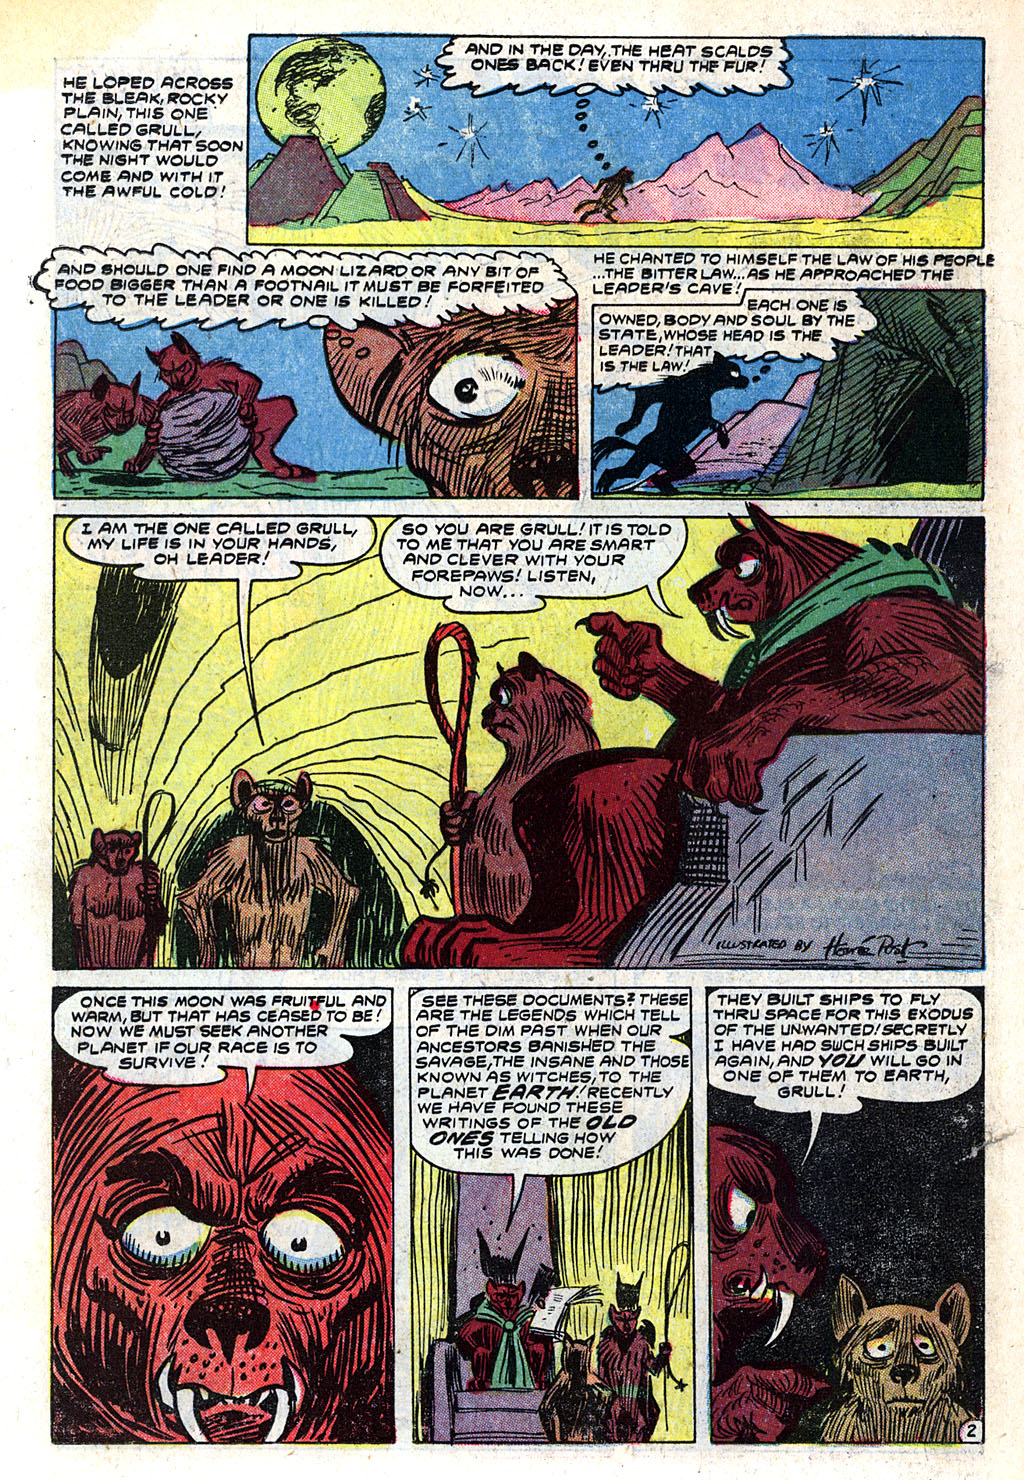 Marvel Tales (1949) 131 Page 21